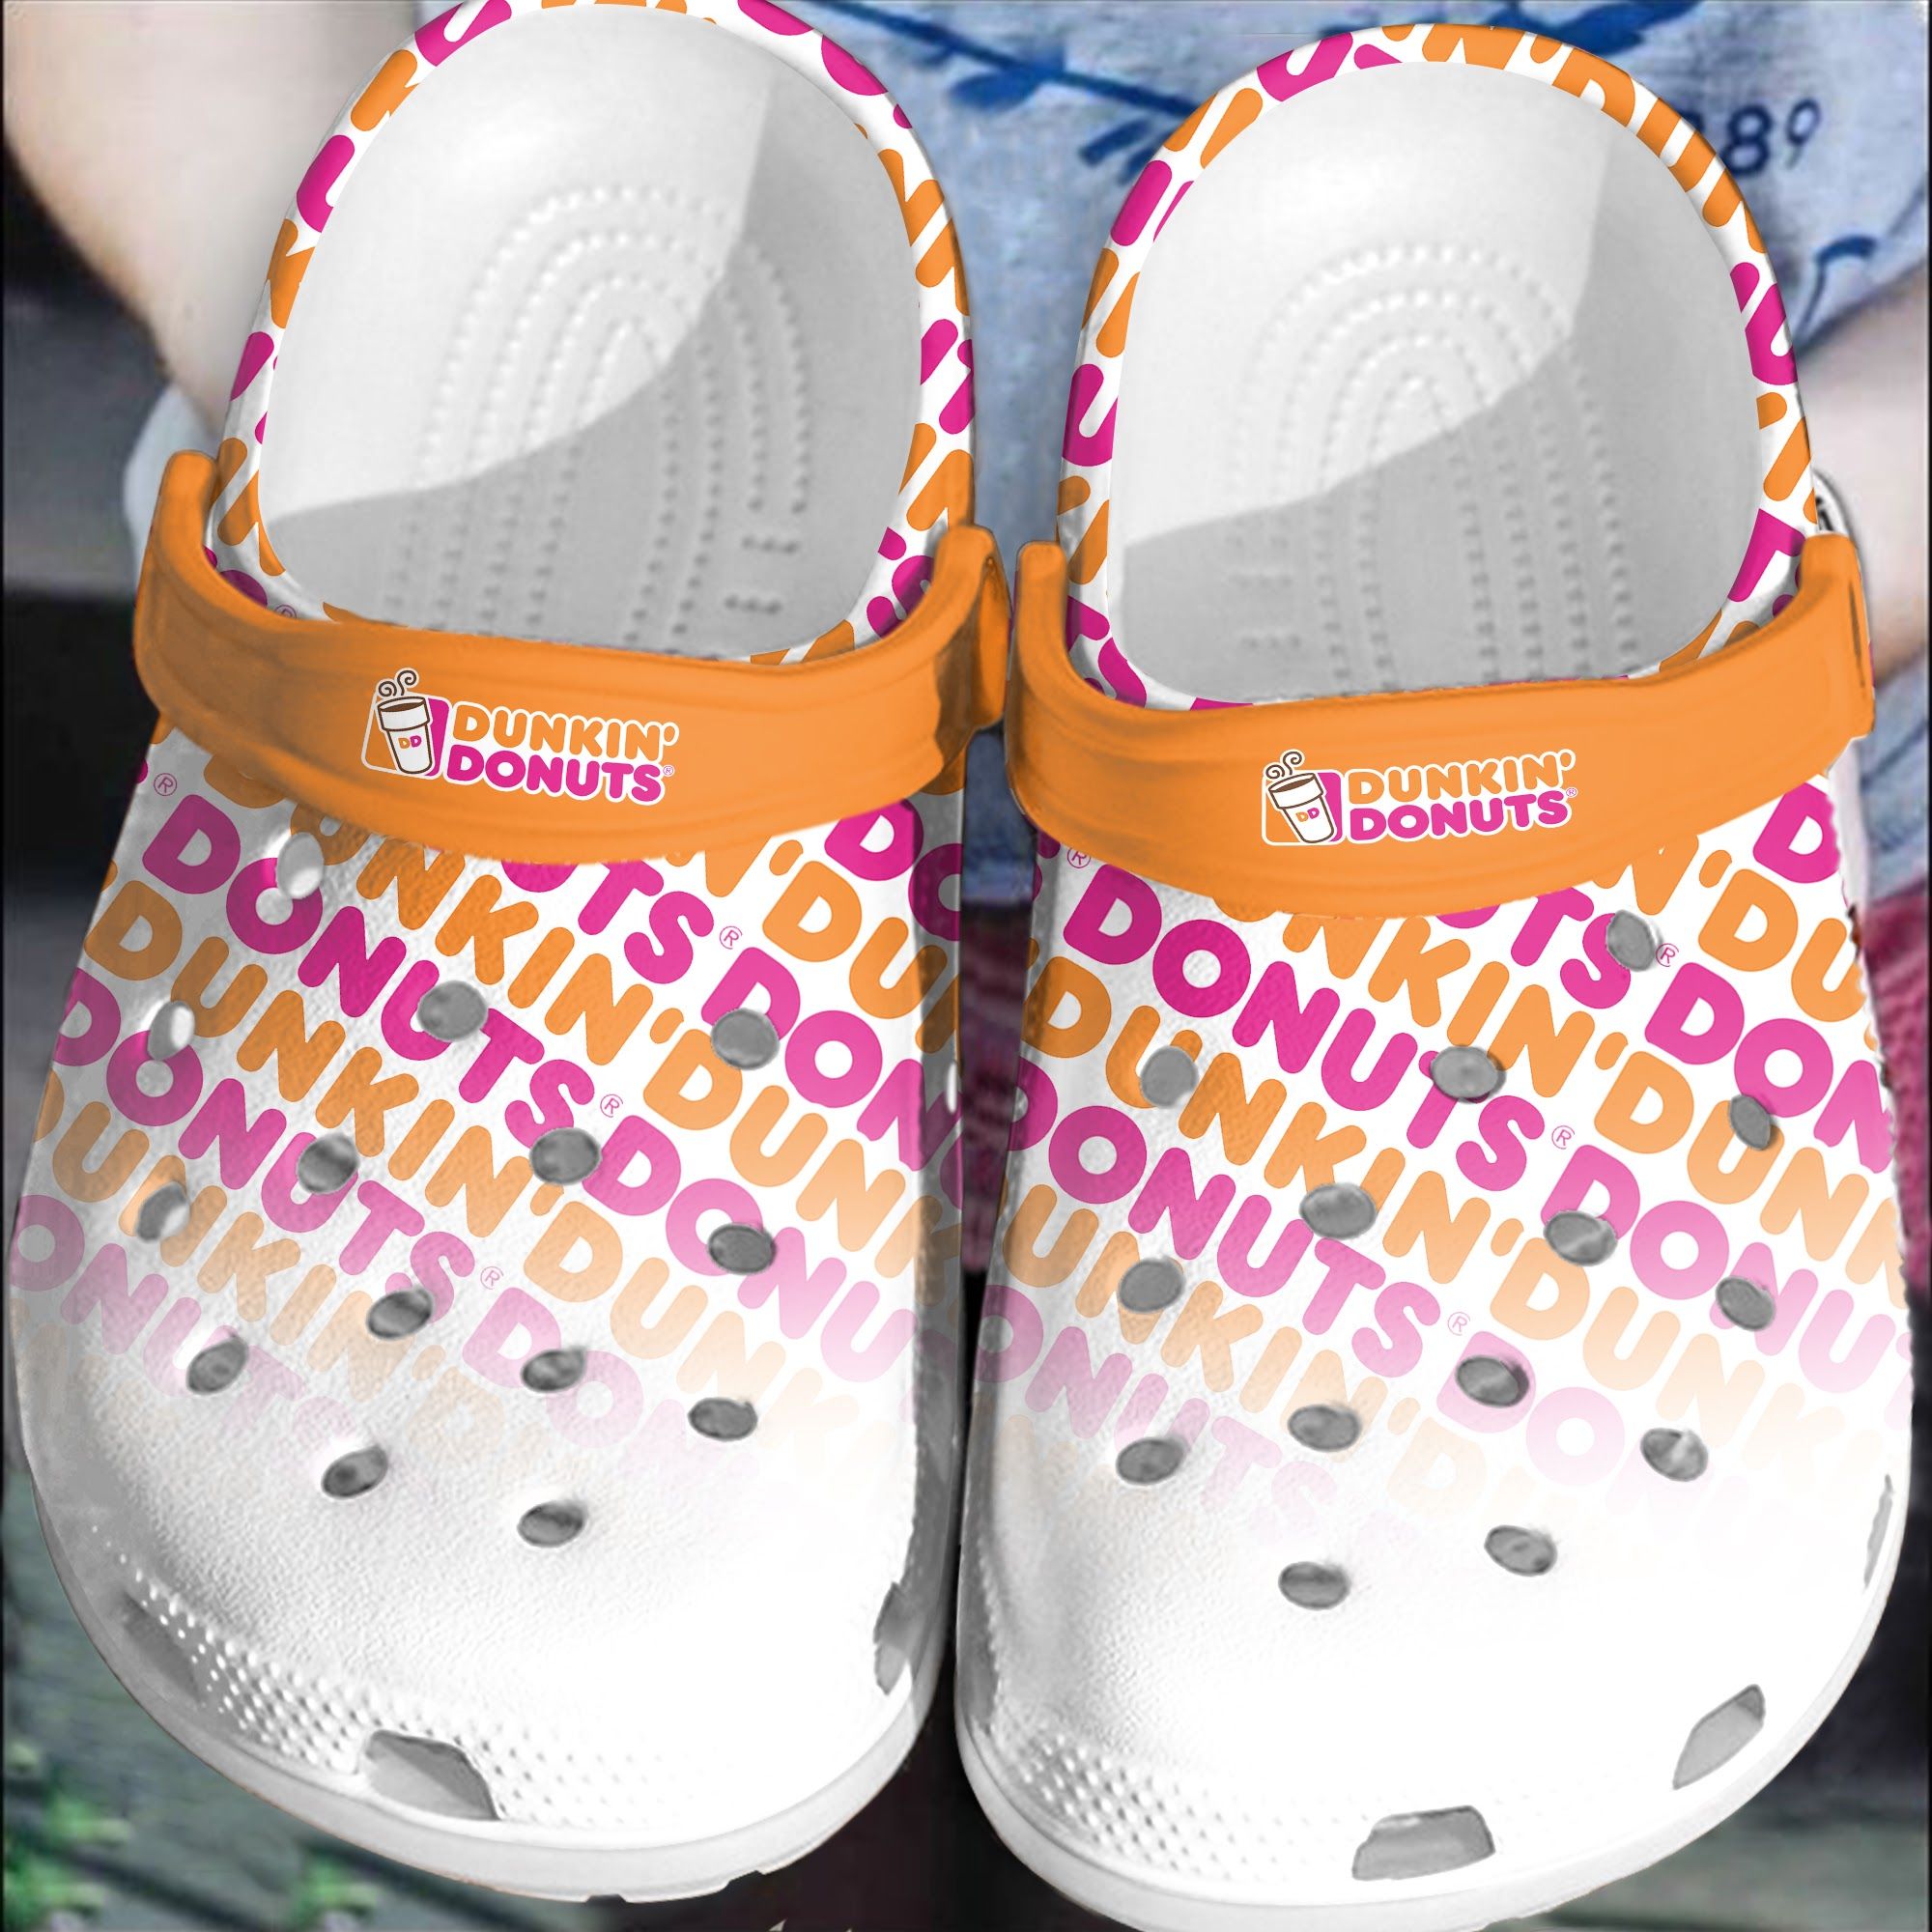 Find yourself a super cute Crocs shoe or give it as a gift 244